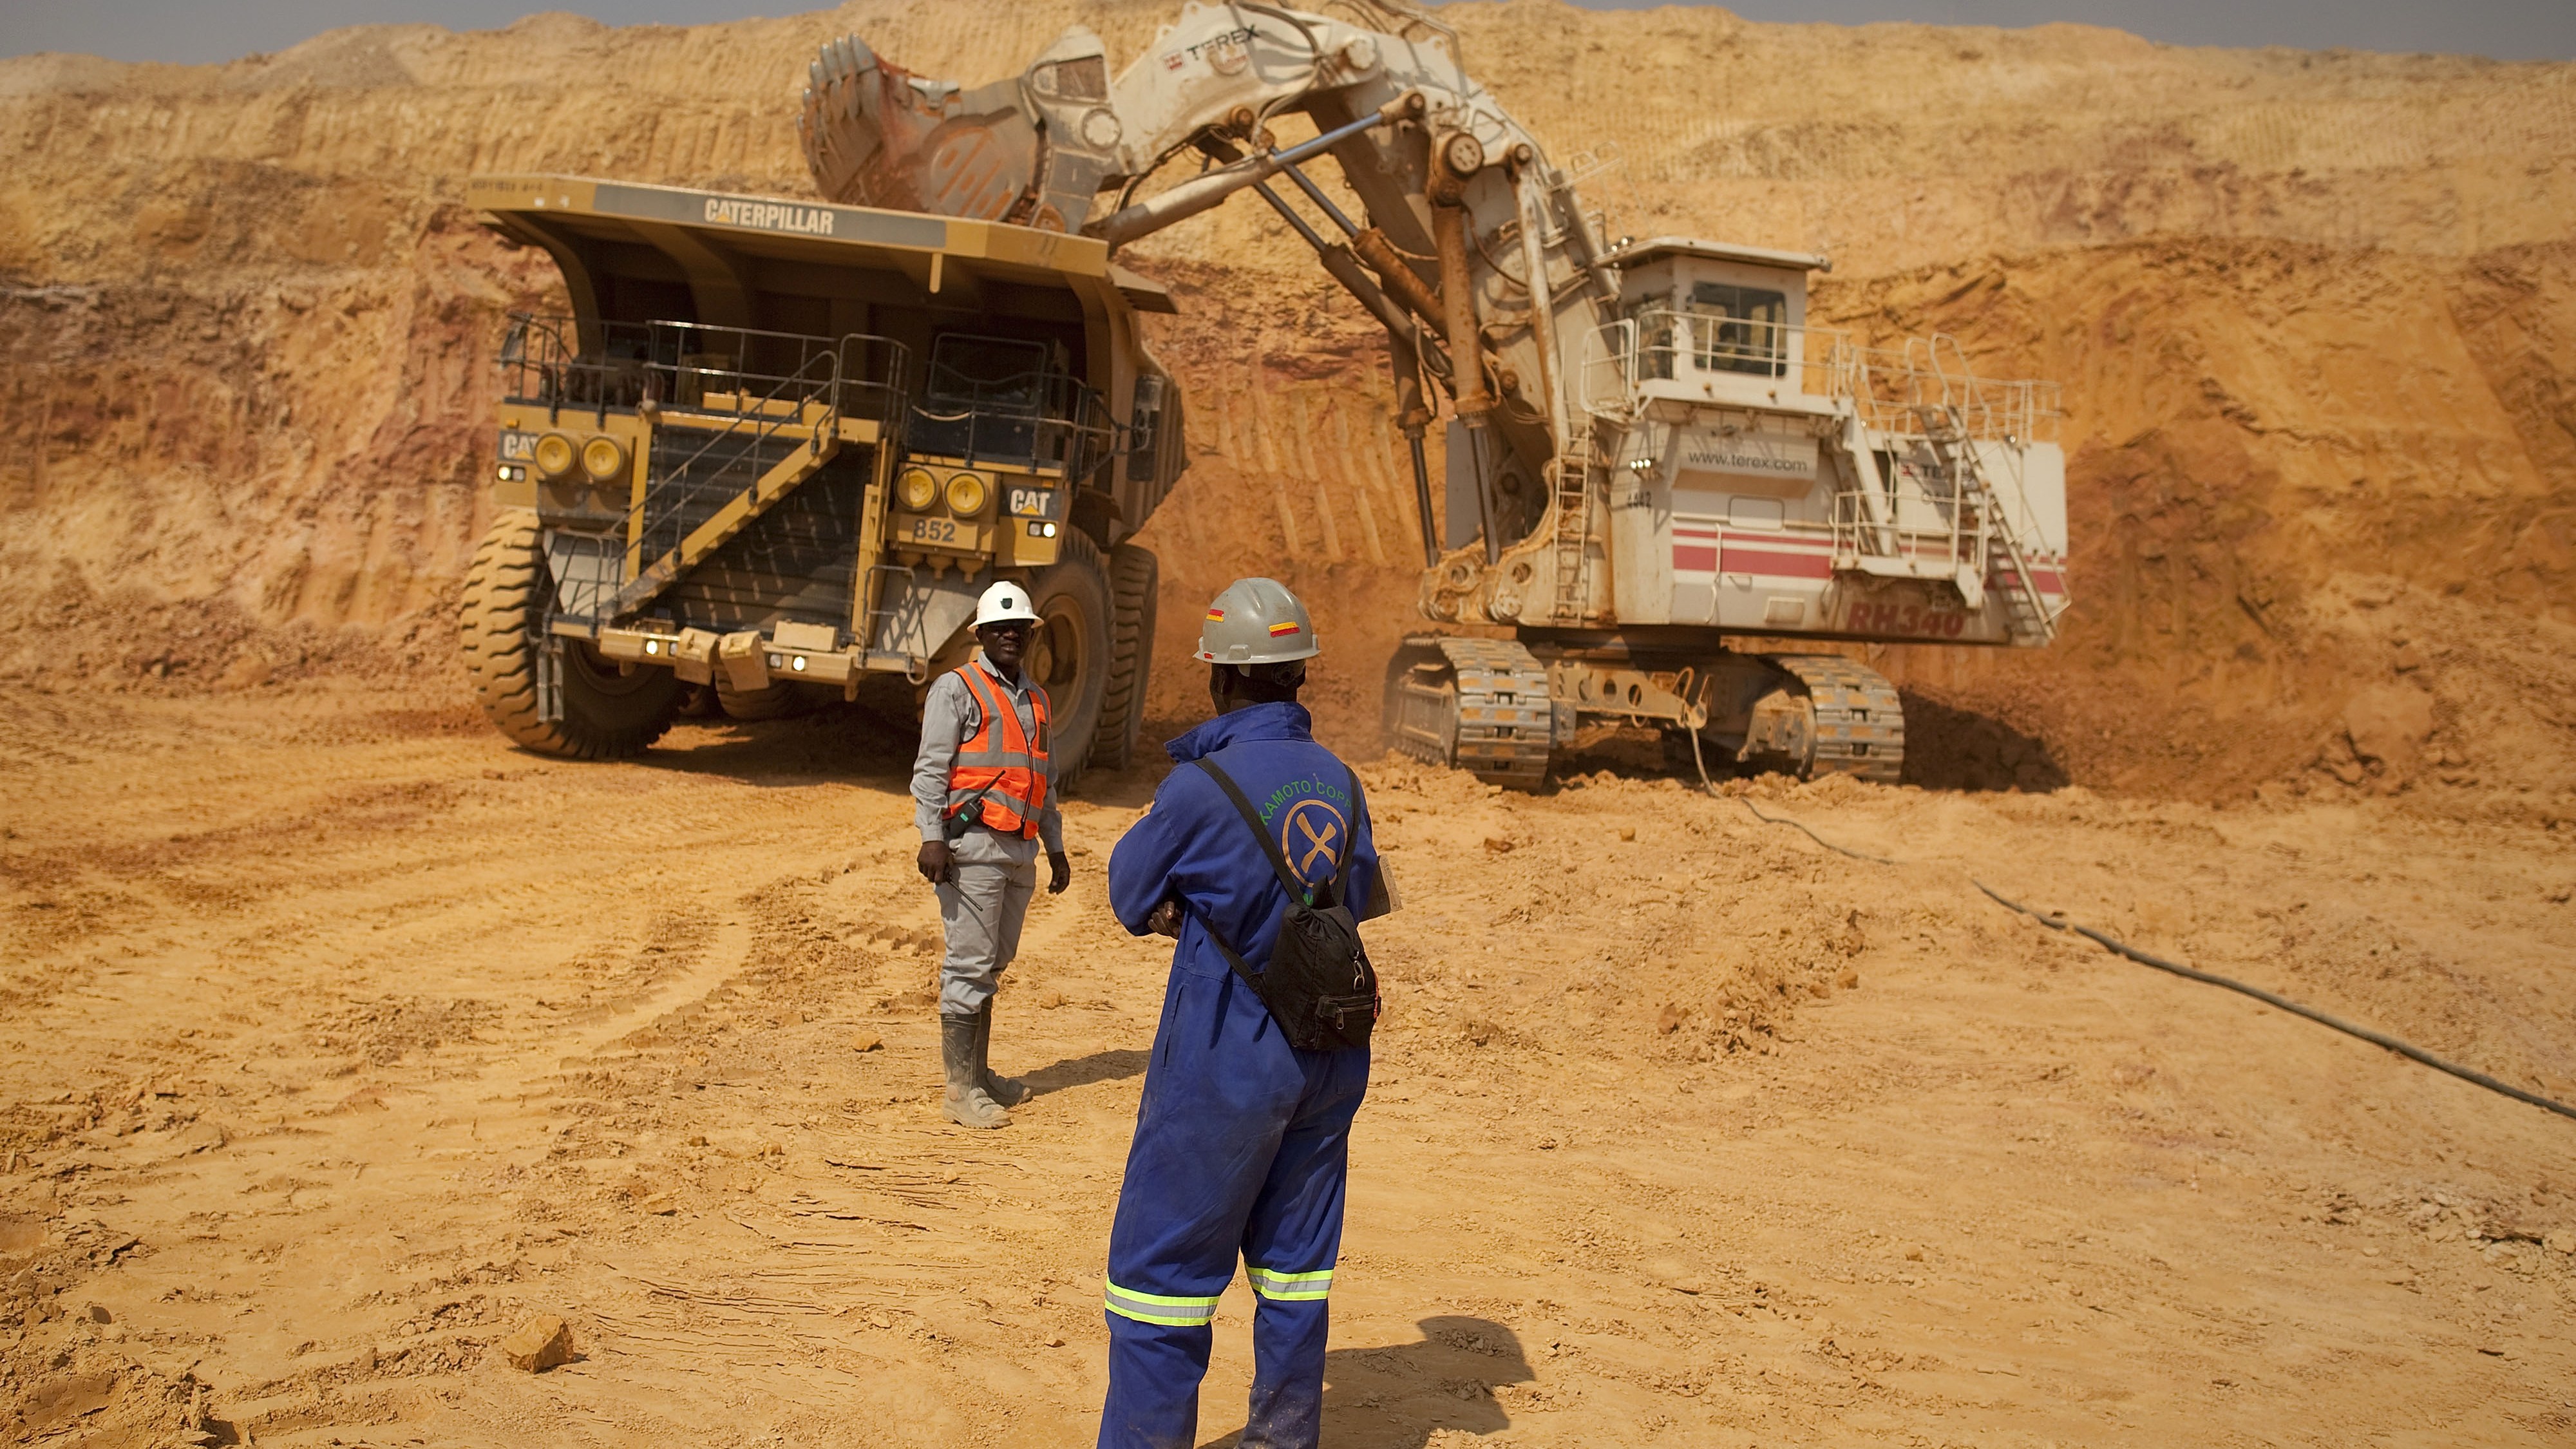 Glencore mines and trades metals including cobalt, which is produced in the Democratic Republic of Congo